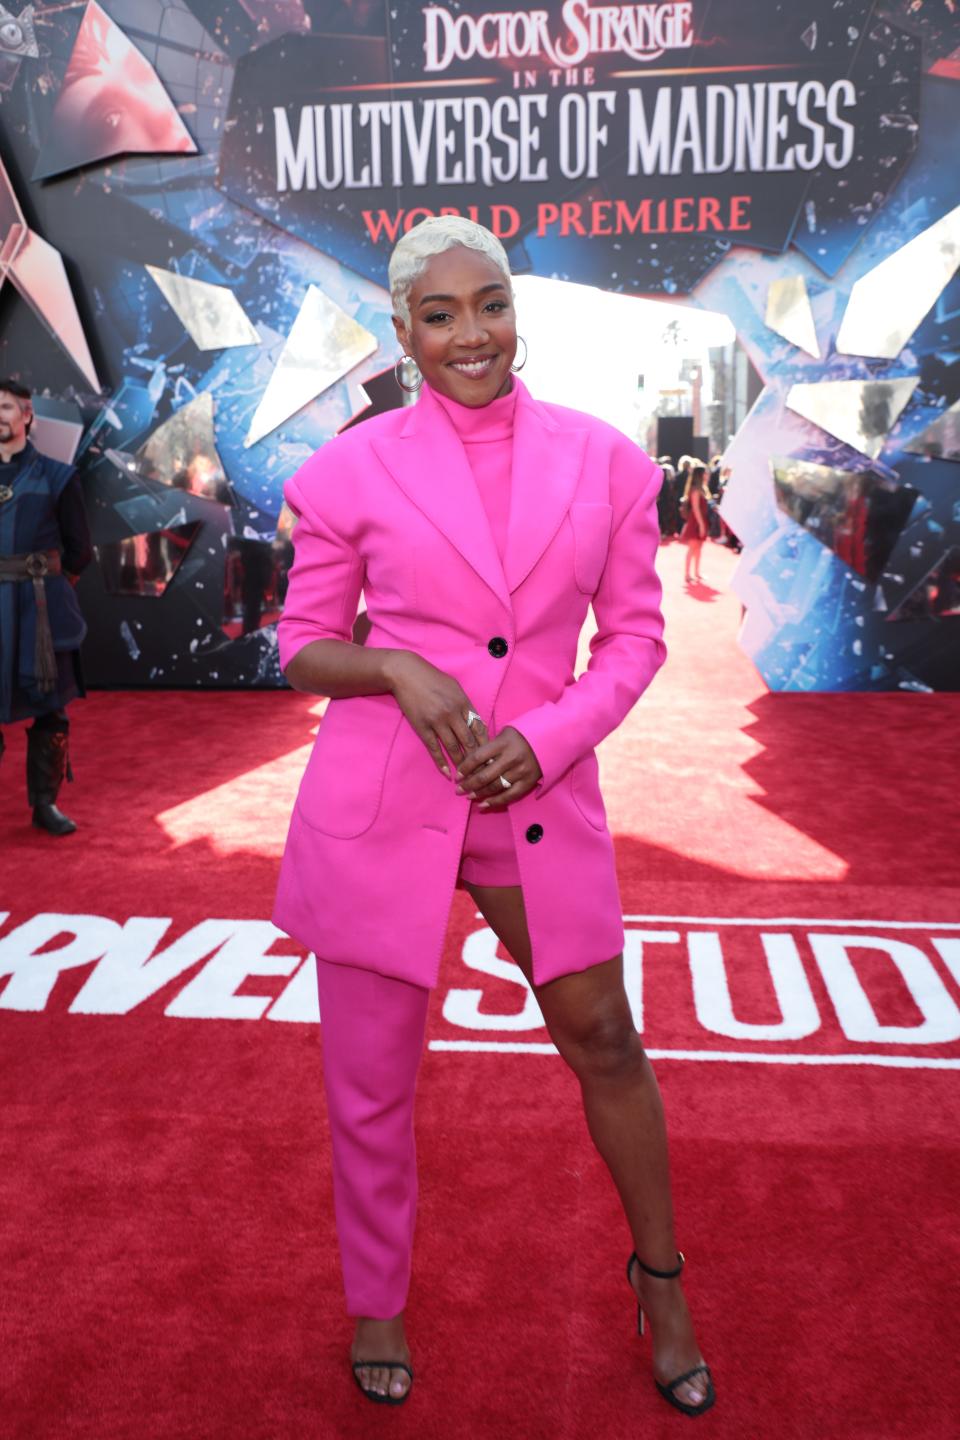 Tiffany Haddish poses at the red carpet for "Doctor Strange in the Multiverse of Madness" in May 2022.